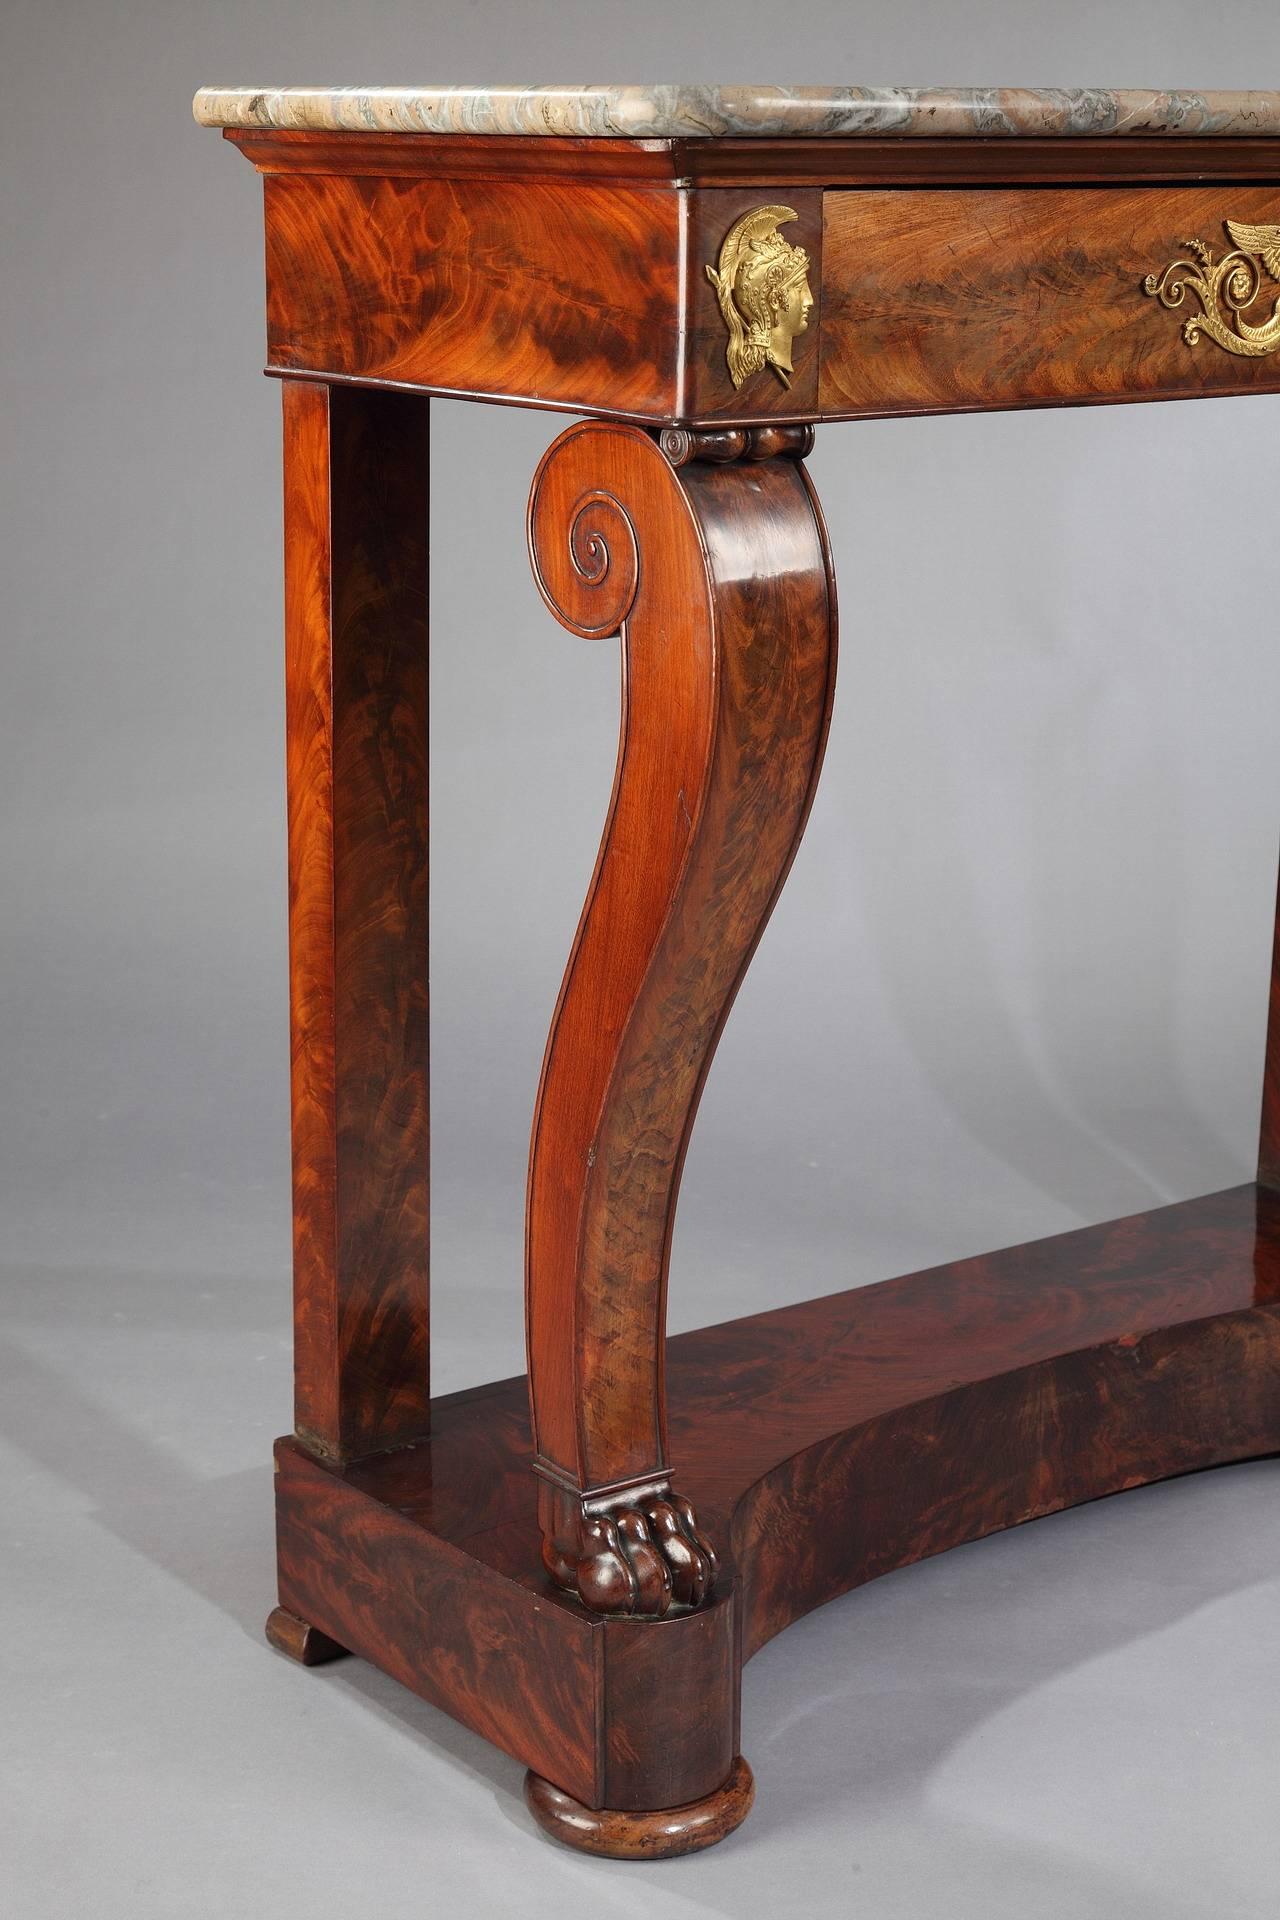 Gilt Empire Mahogany Console Table Stamped by Othon Kolping